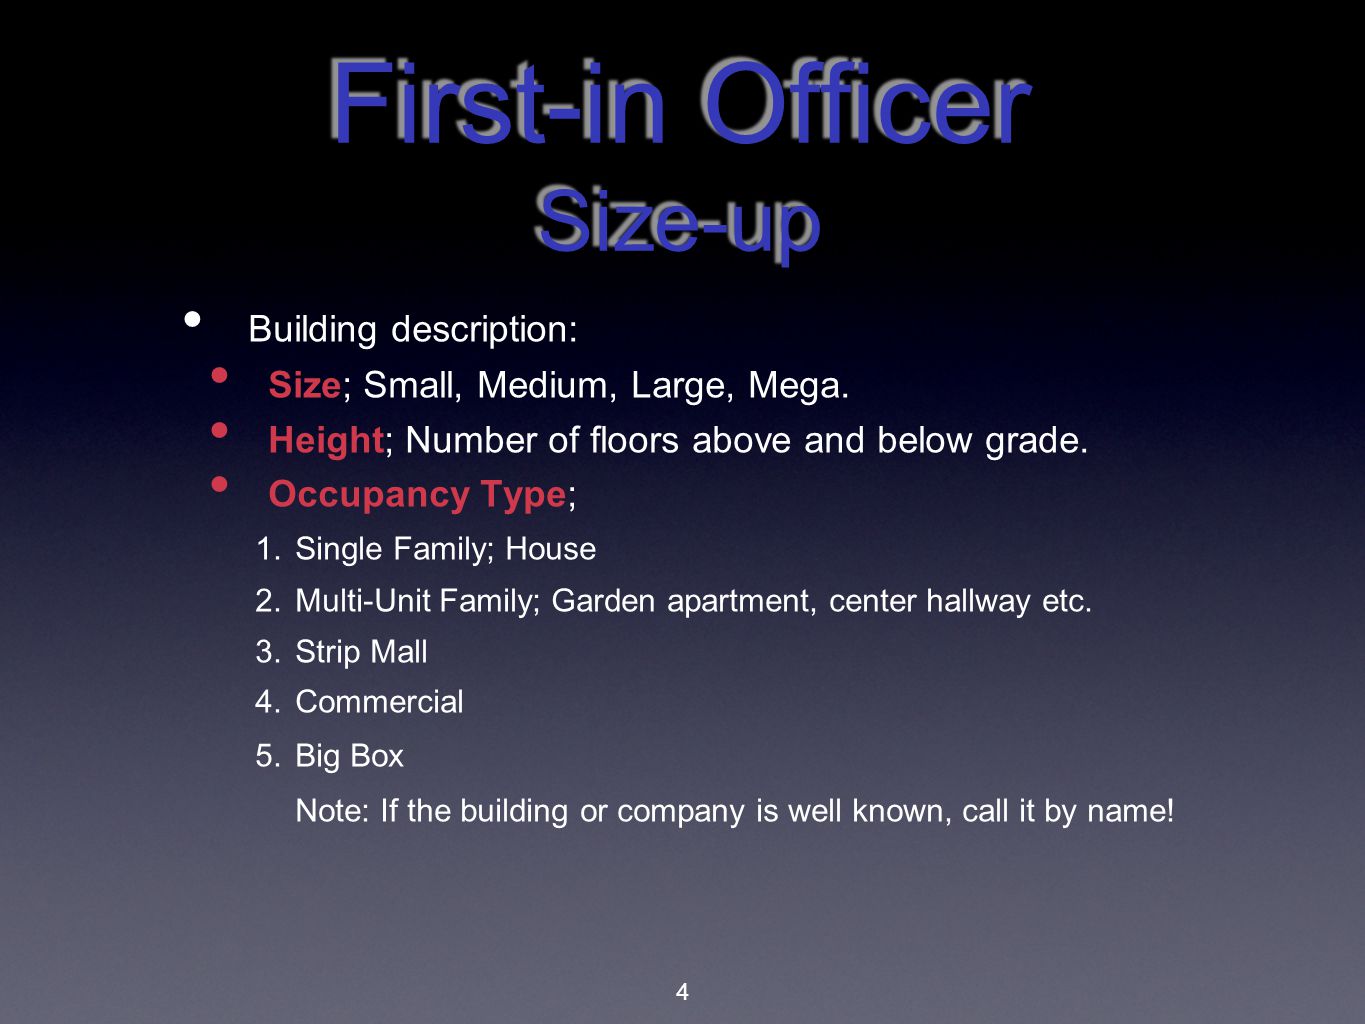 First-in Officer Size-up